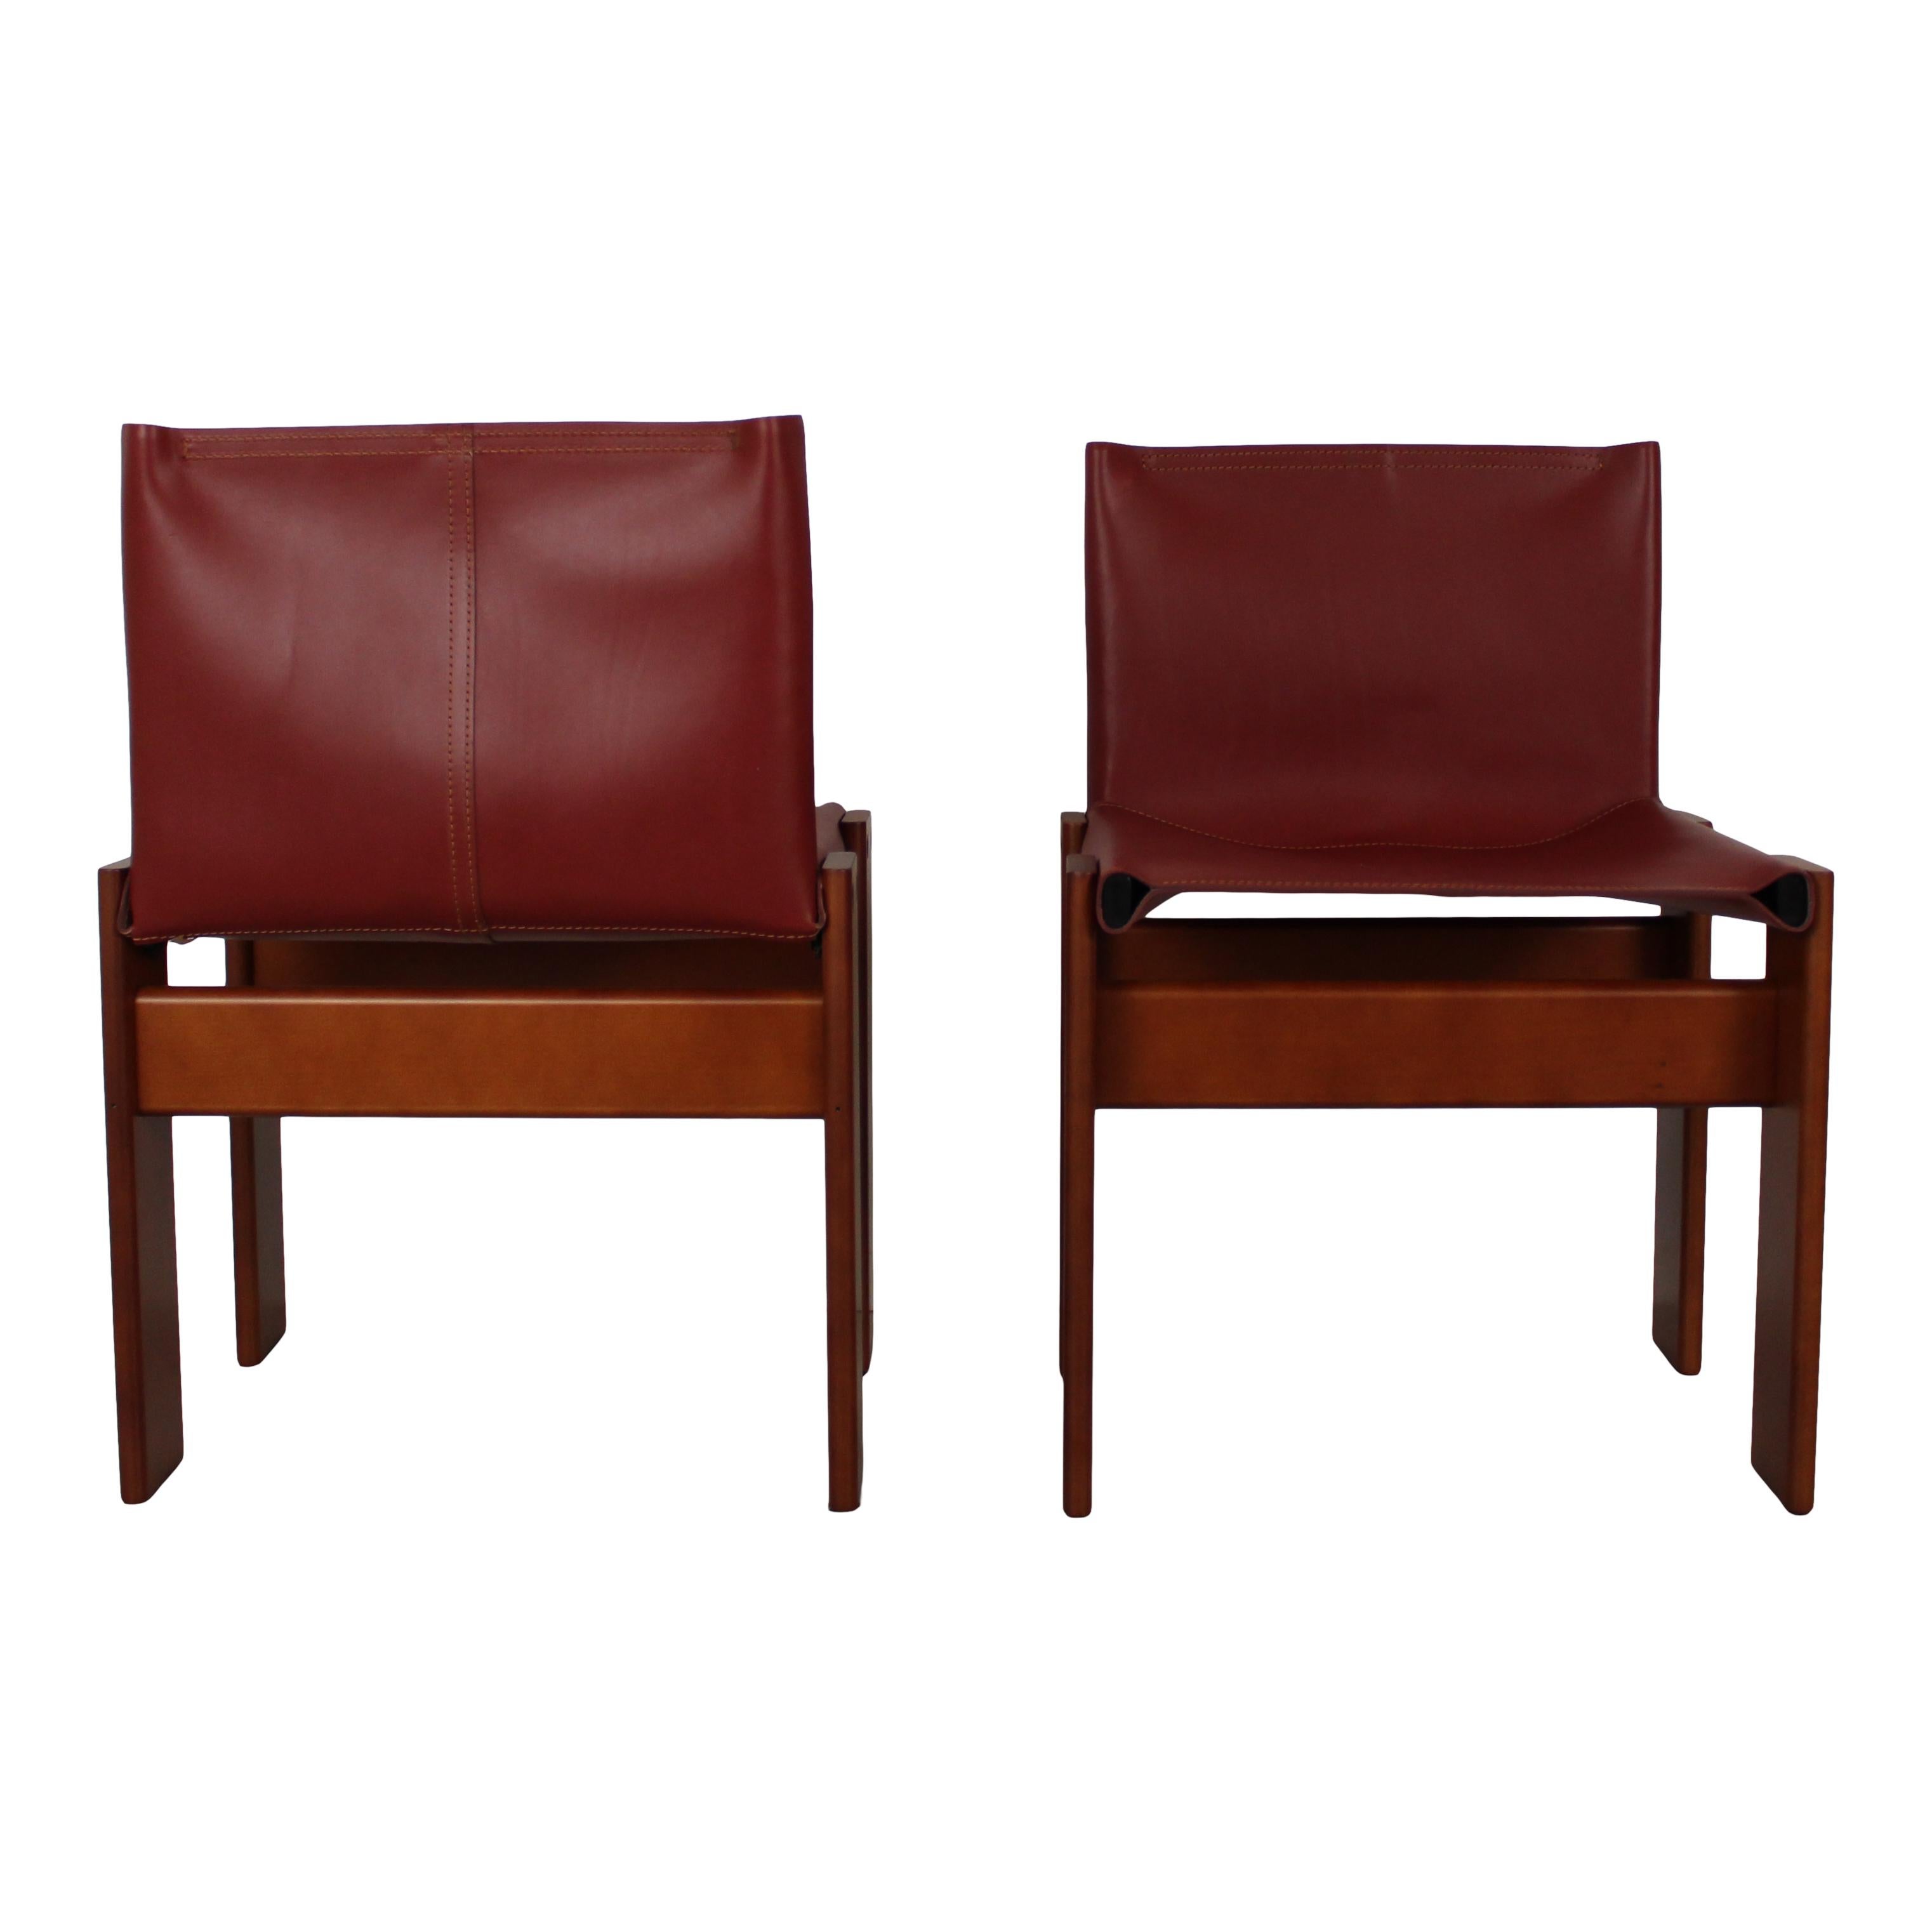 Afra & Tobia Scarpa English Red  Leather Monk Dining Chair for Molteni, Set of 4 For Sale 5